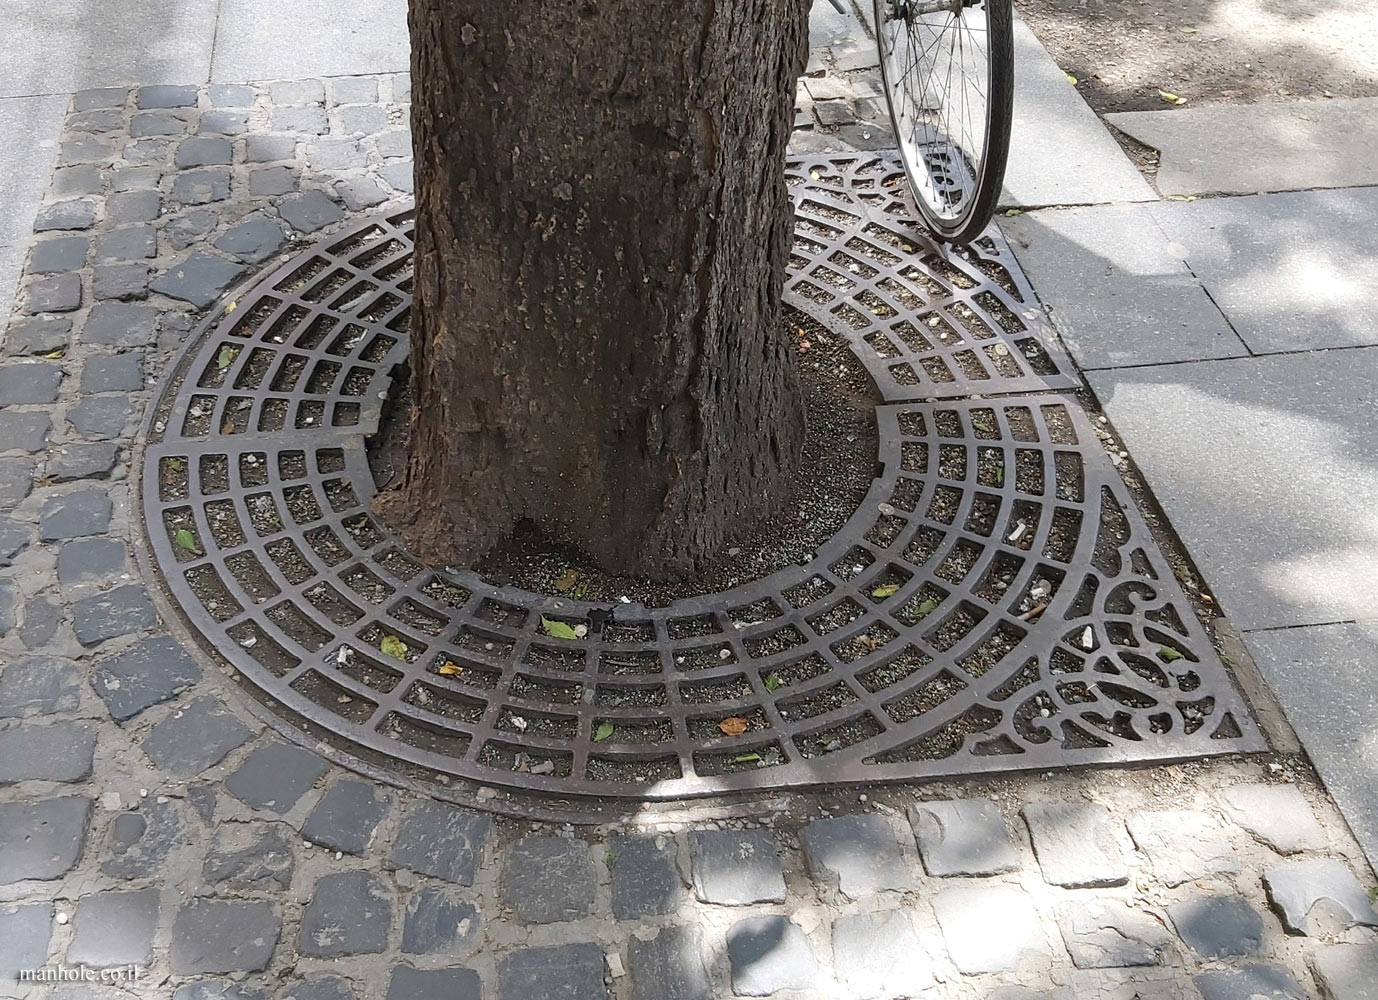 Budapest - A Tree grate with a network of circles half of which is surrounded by a square frame